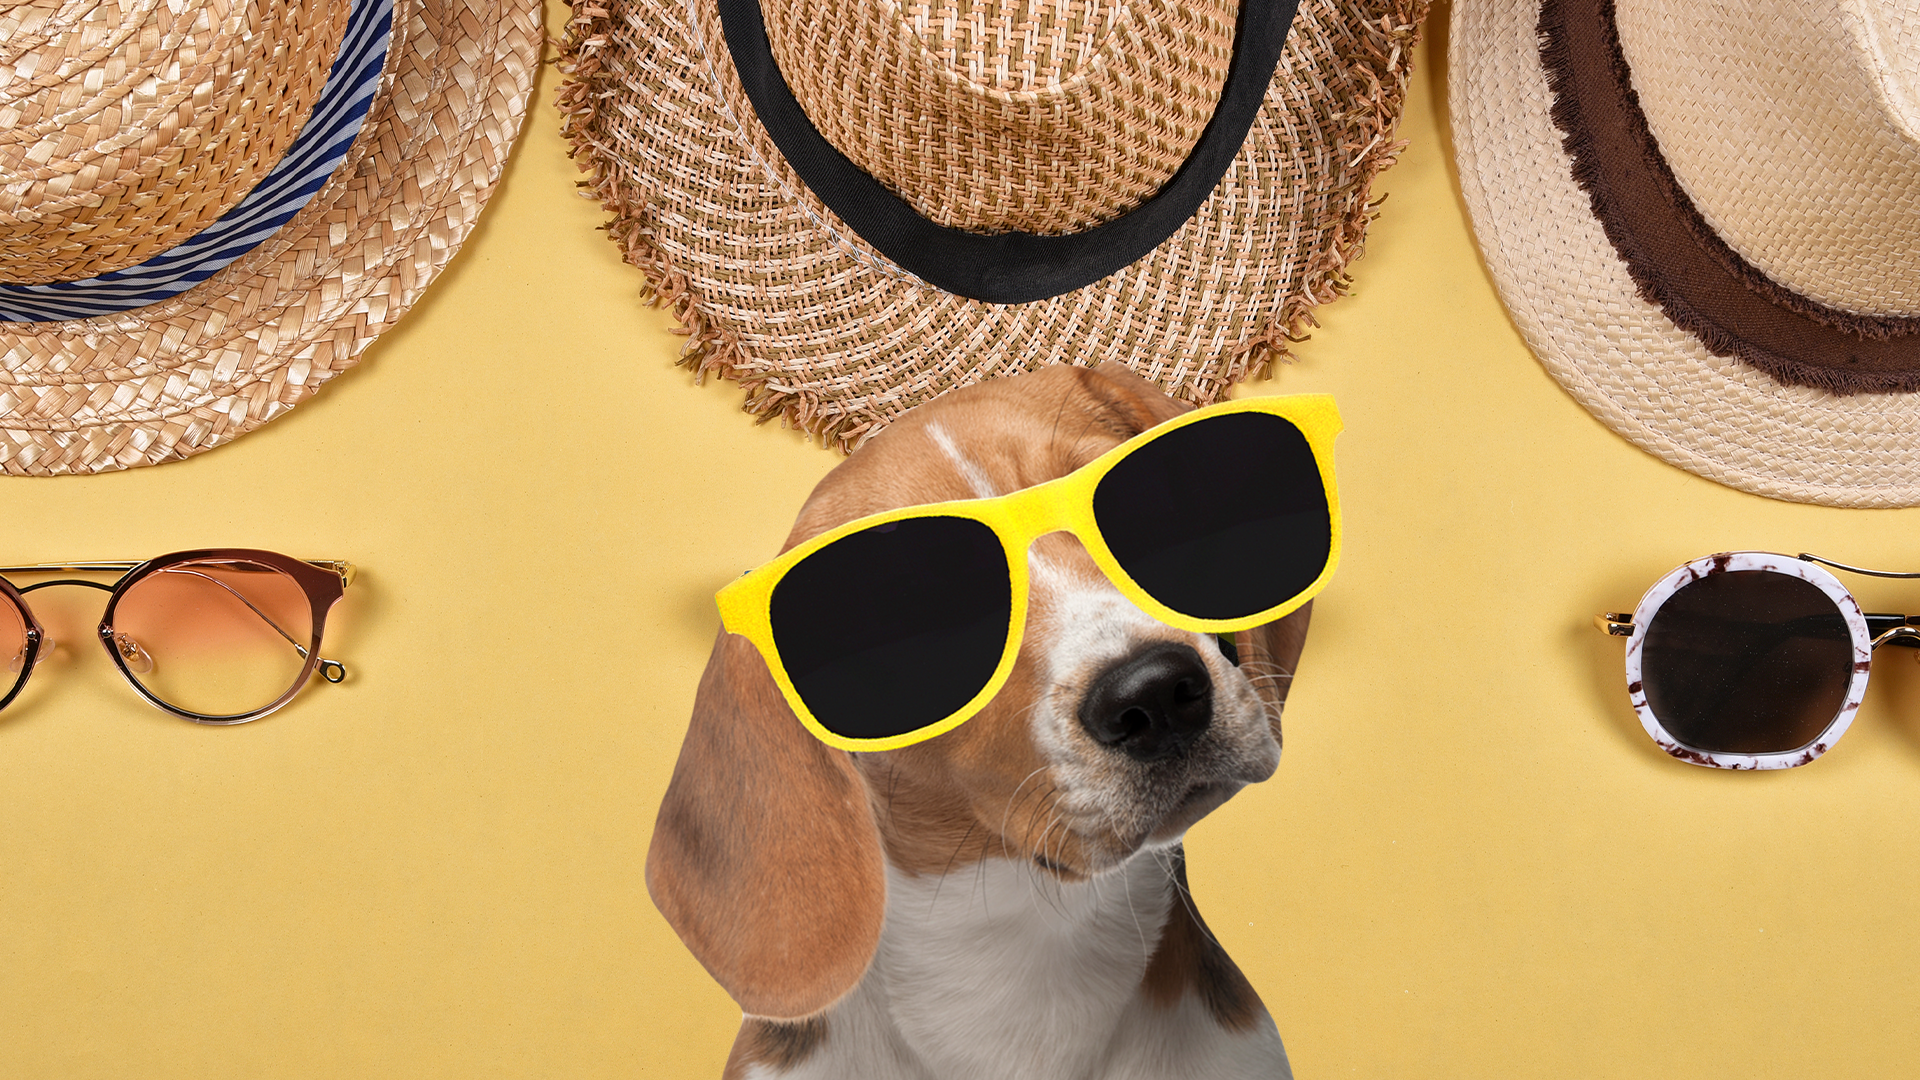 Dog in sunglasses with hats and sunglasses on yellow background